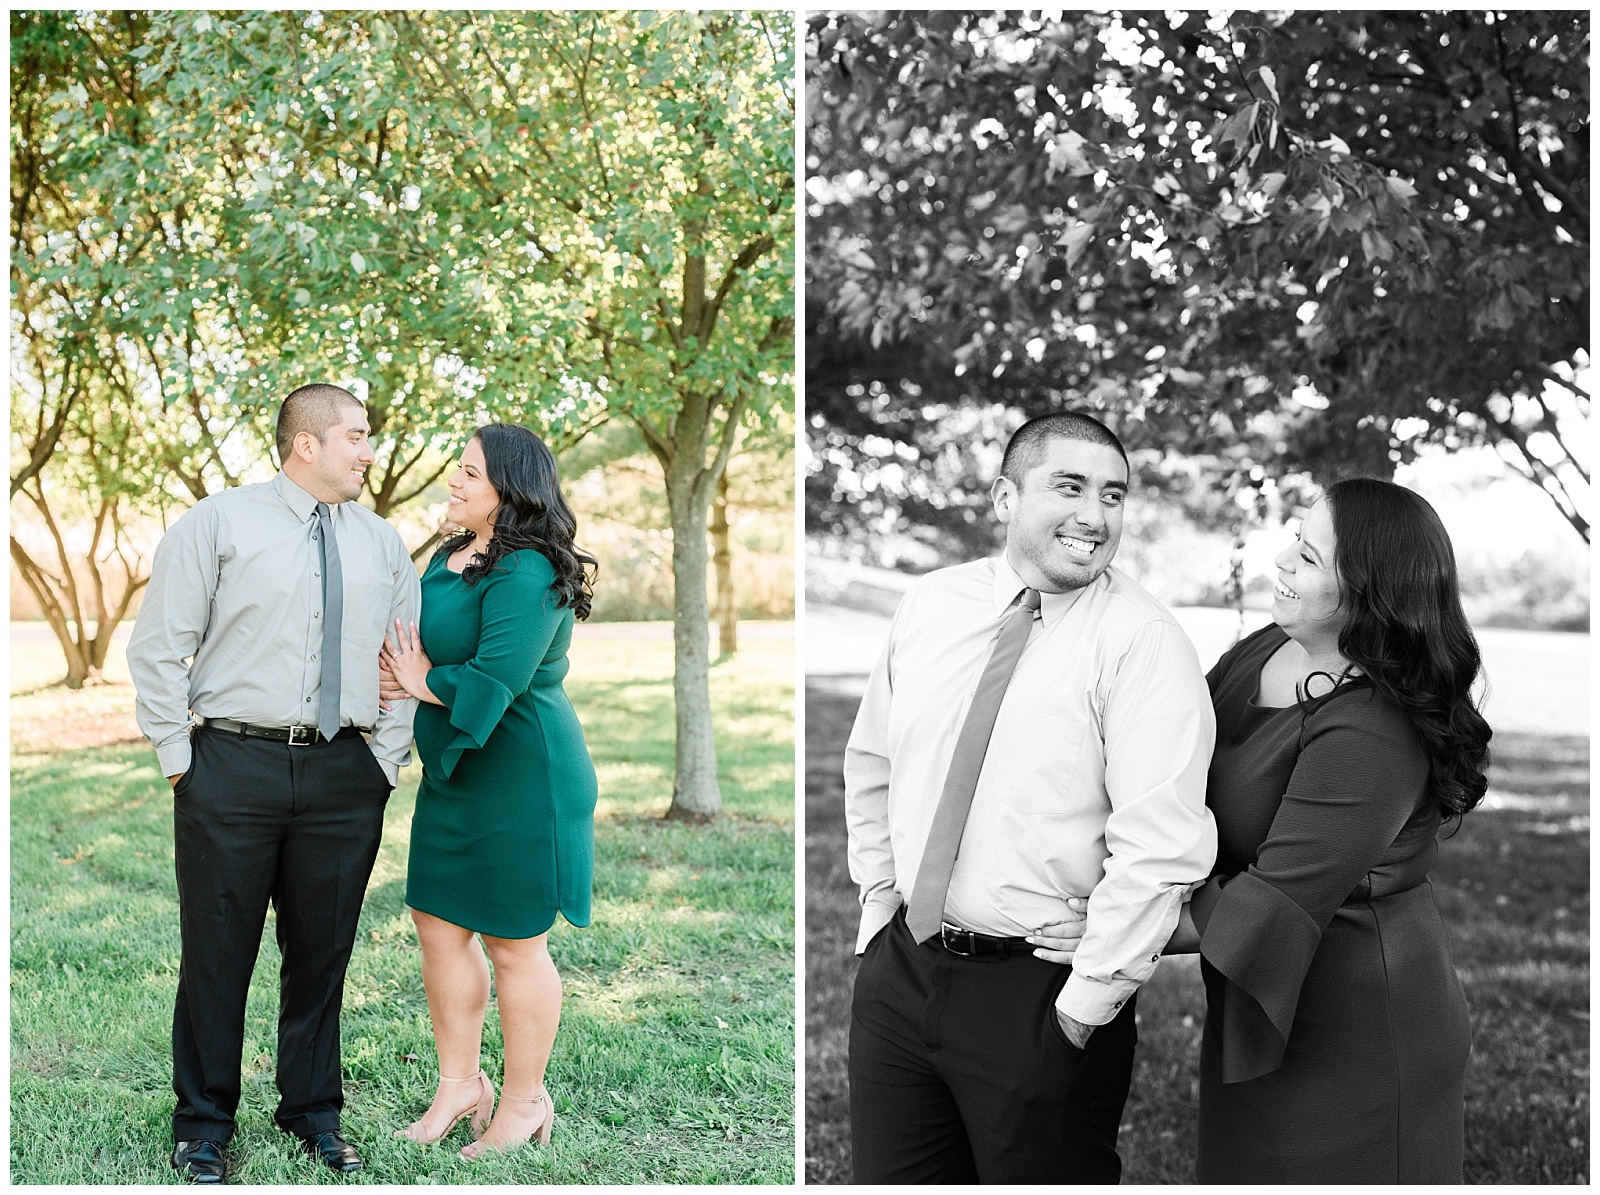 Engaged,Engagement Session,Field,Garden,Jersey City,Liberty State Park,NJ,Wedding Photographer,